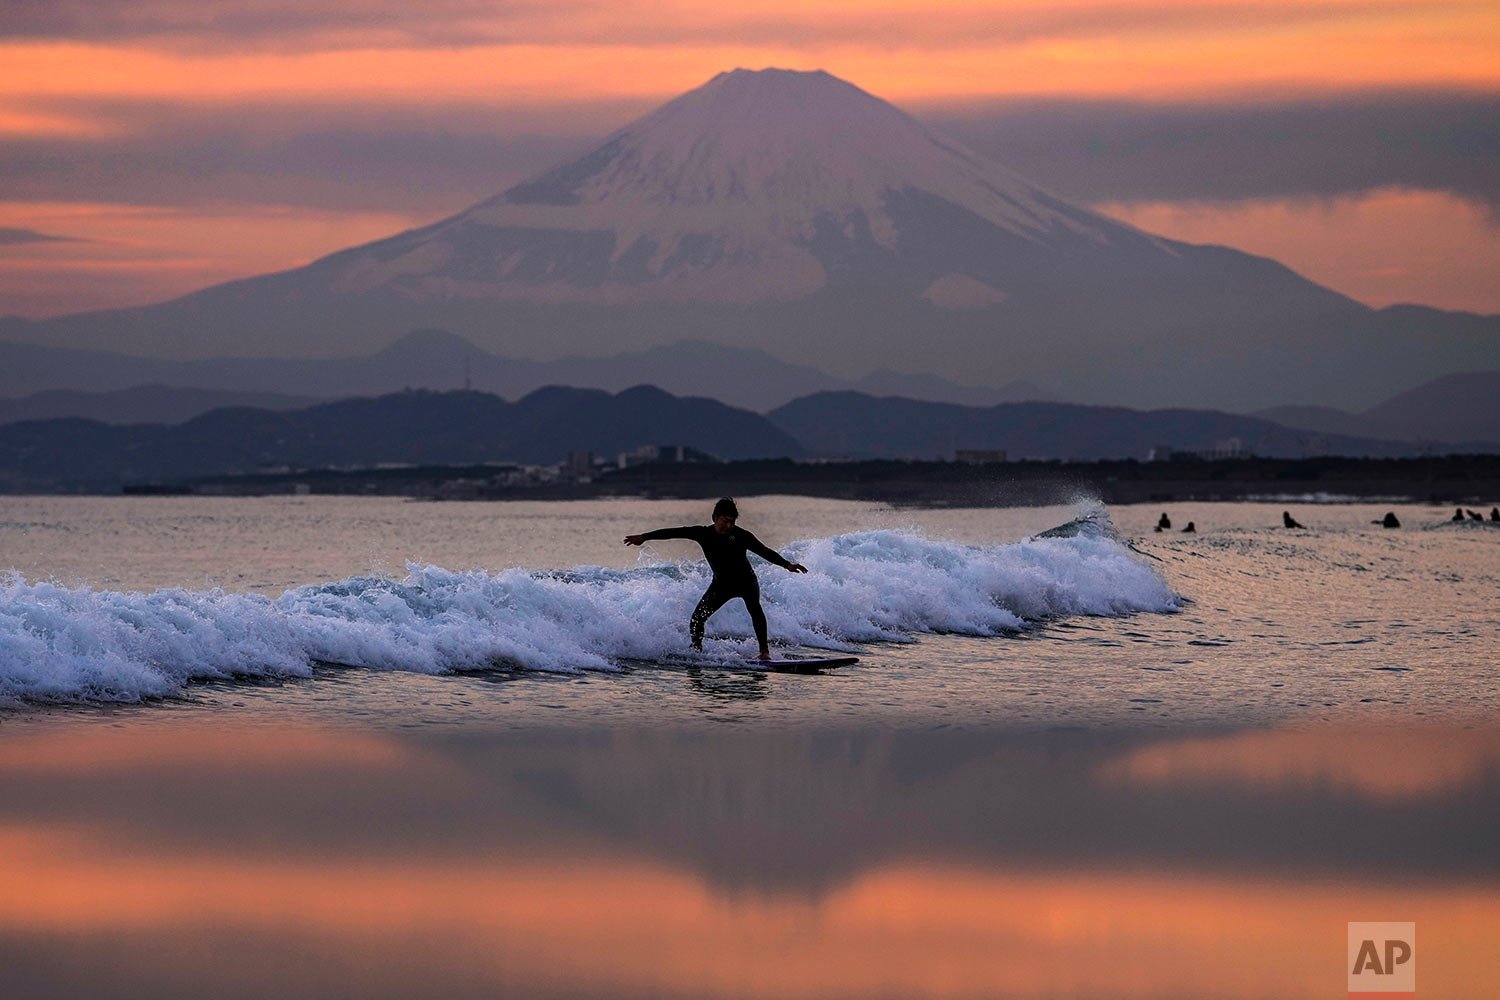  A surfer rides a wave in front of iconic Mount Fuji as the sun sets Friday, Dec. 10, 2021, in Fujisawa, south of Tokyo. (AP Photo/Kiichiro Sato) 